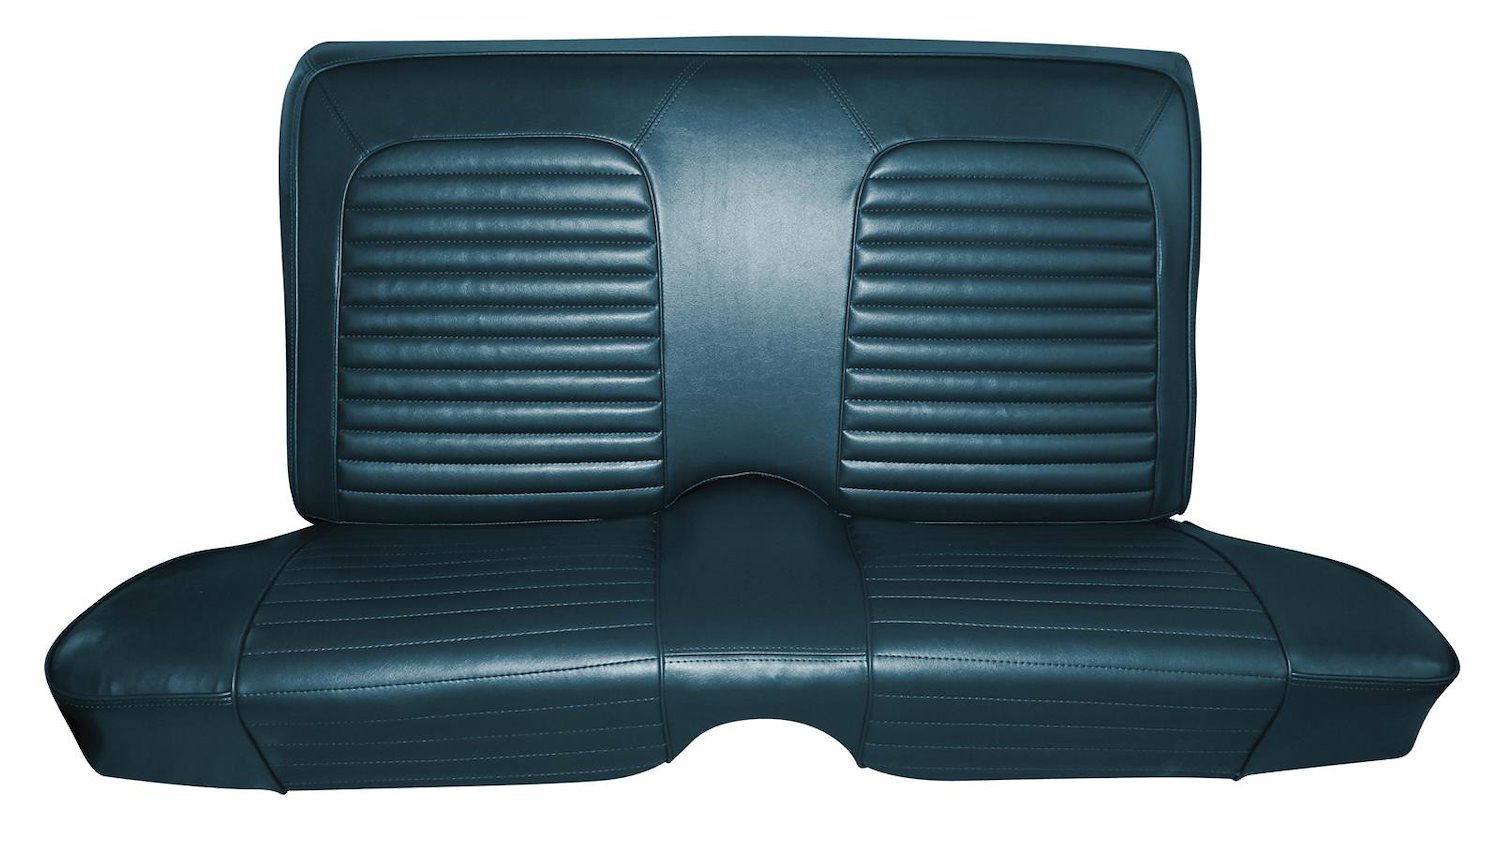 1962 Chevrolet Impala Convertible Interior Front and Rear Bench Seat Upholstery Set.